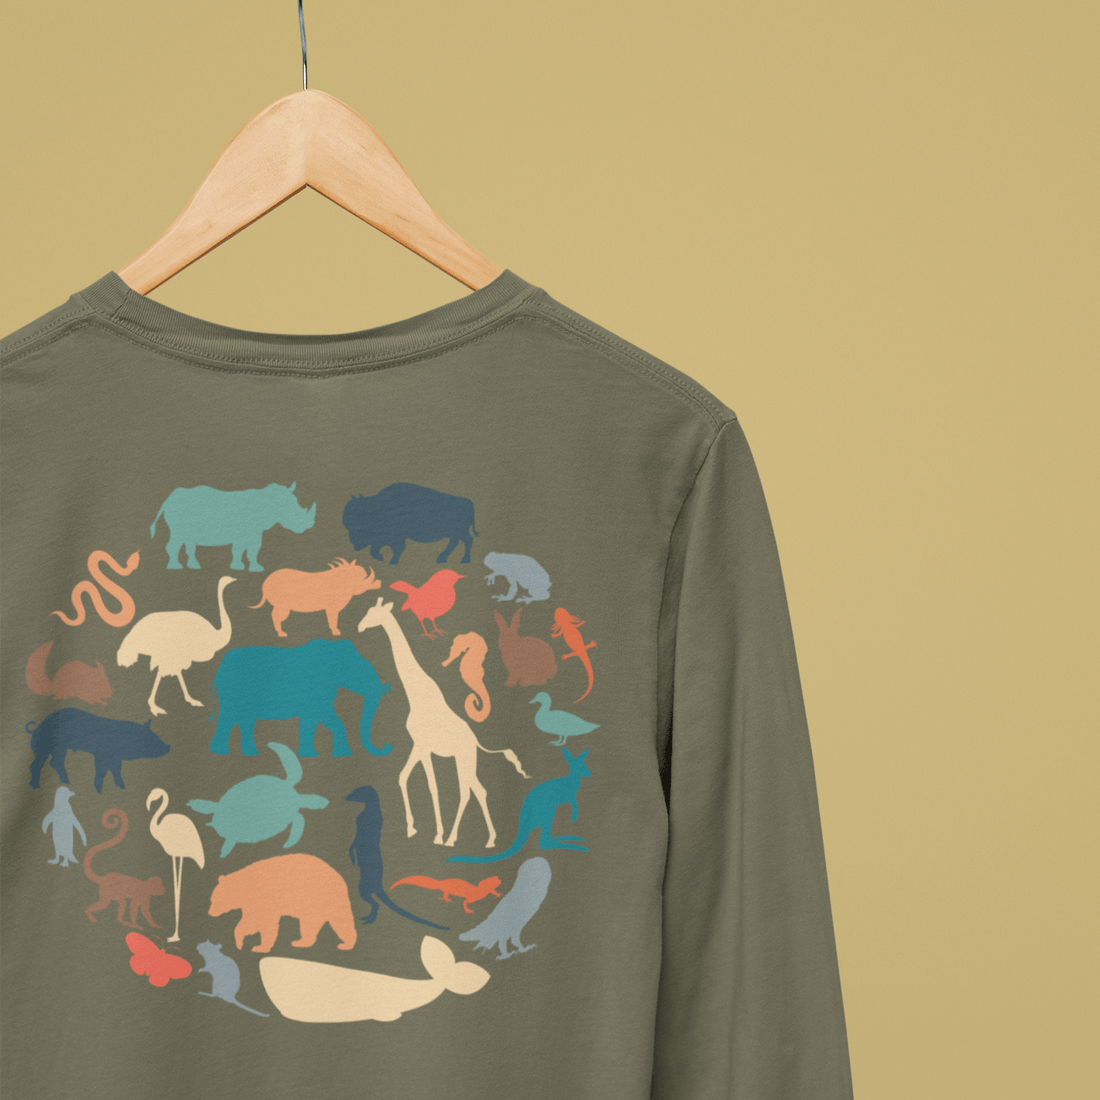 Back of green long sleeve on hanger showing grouping of animals in big circle